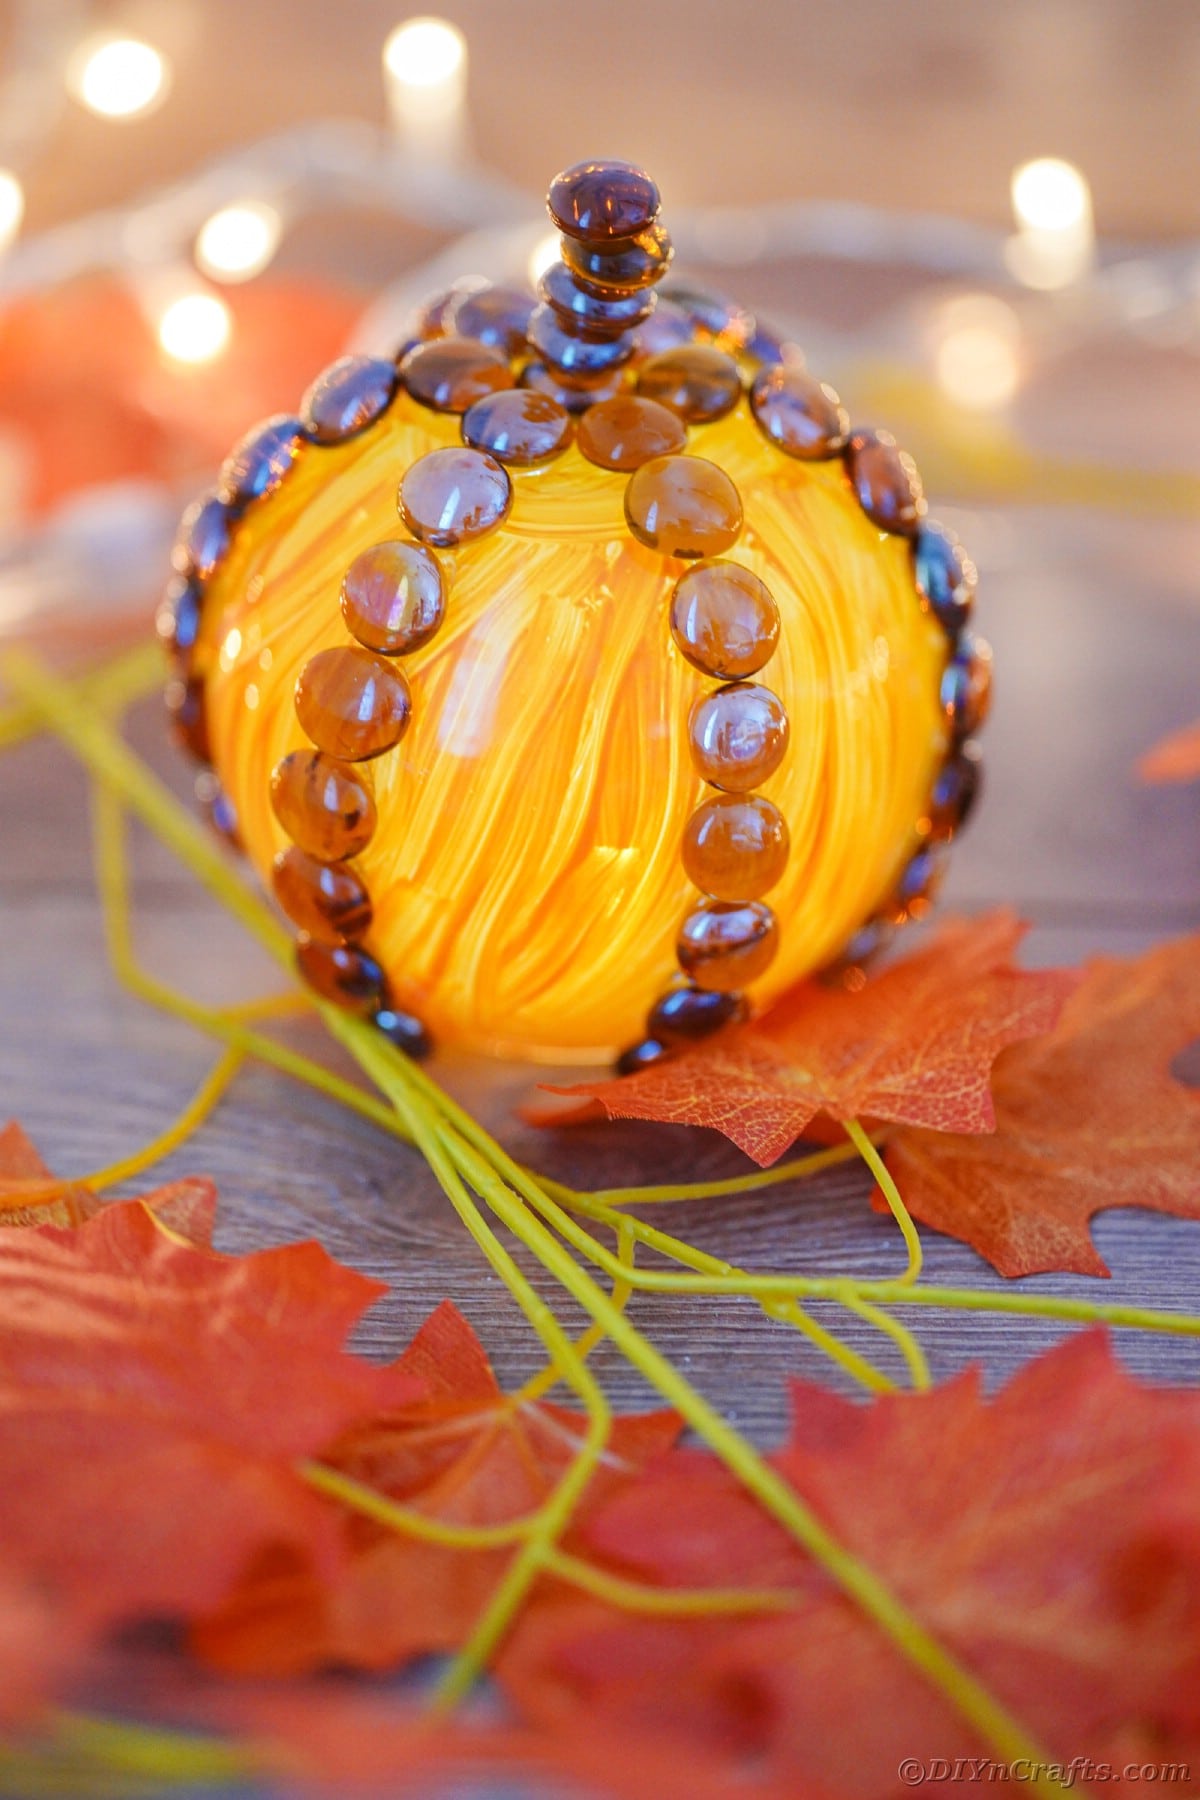 Painted glass pumpkin on table with lights in background